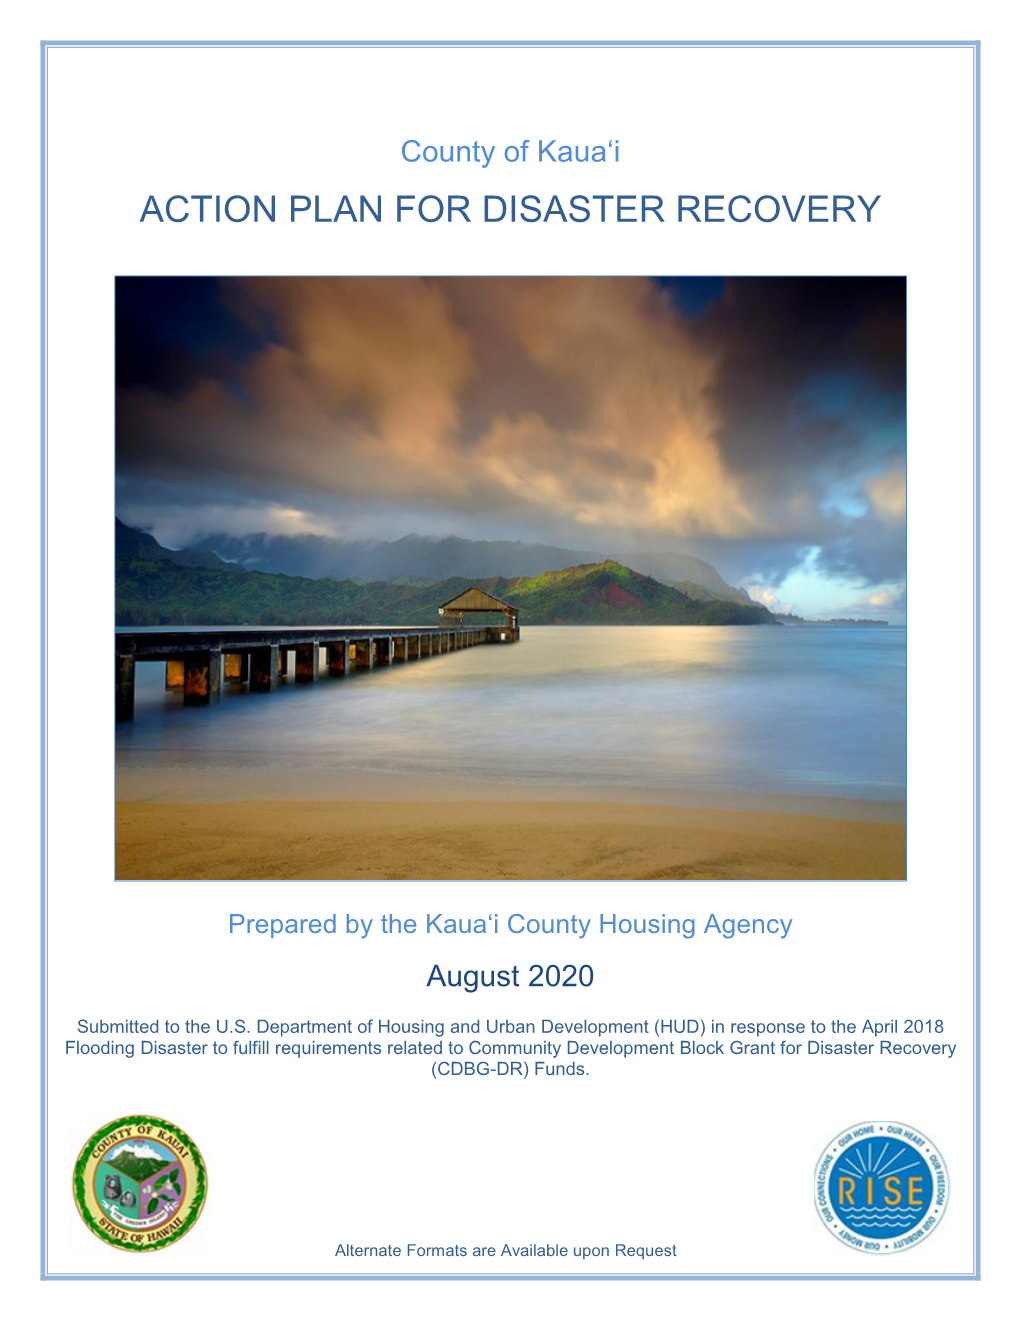 Action Plan for Disaster Recovery